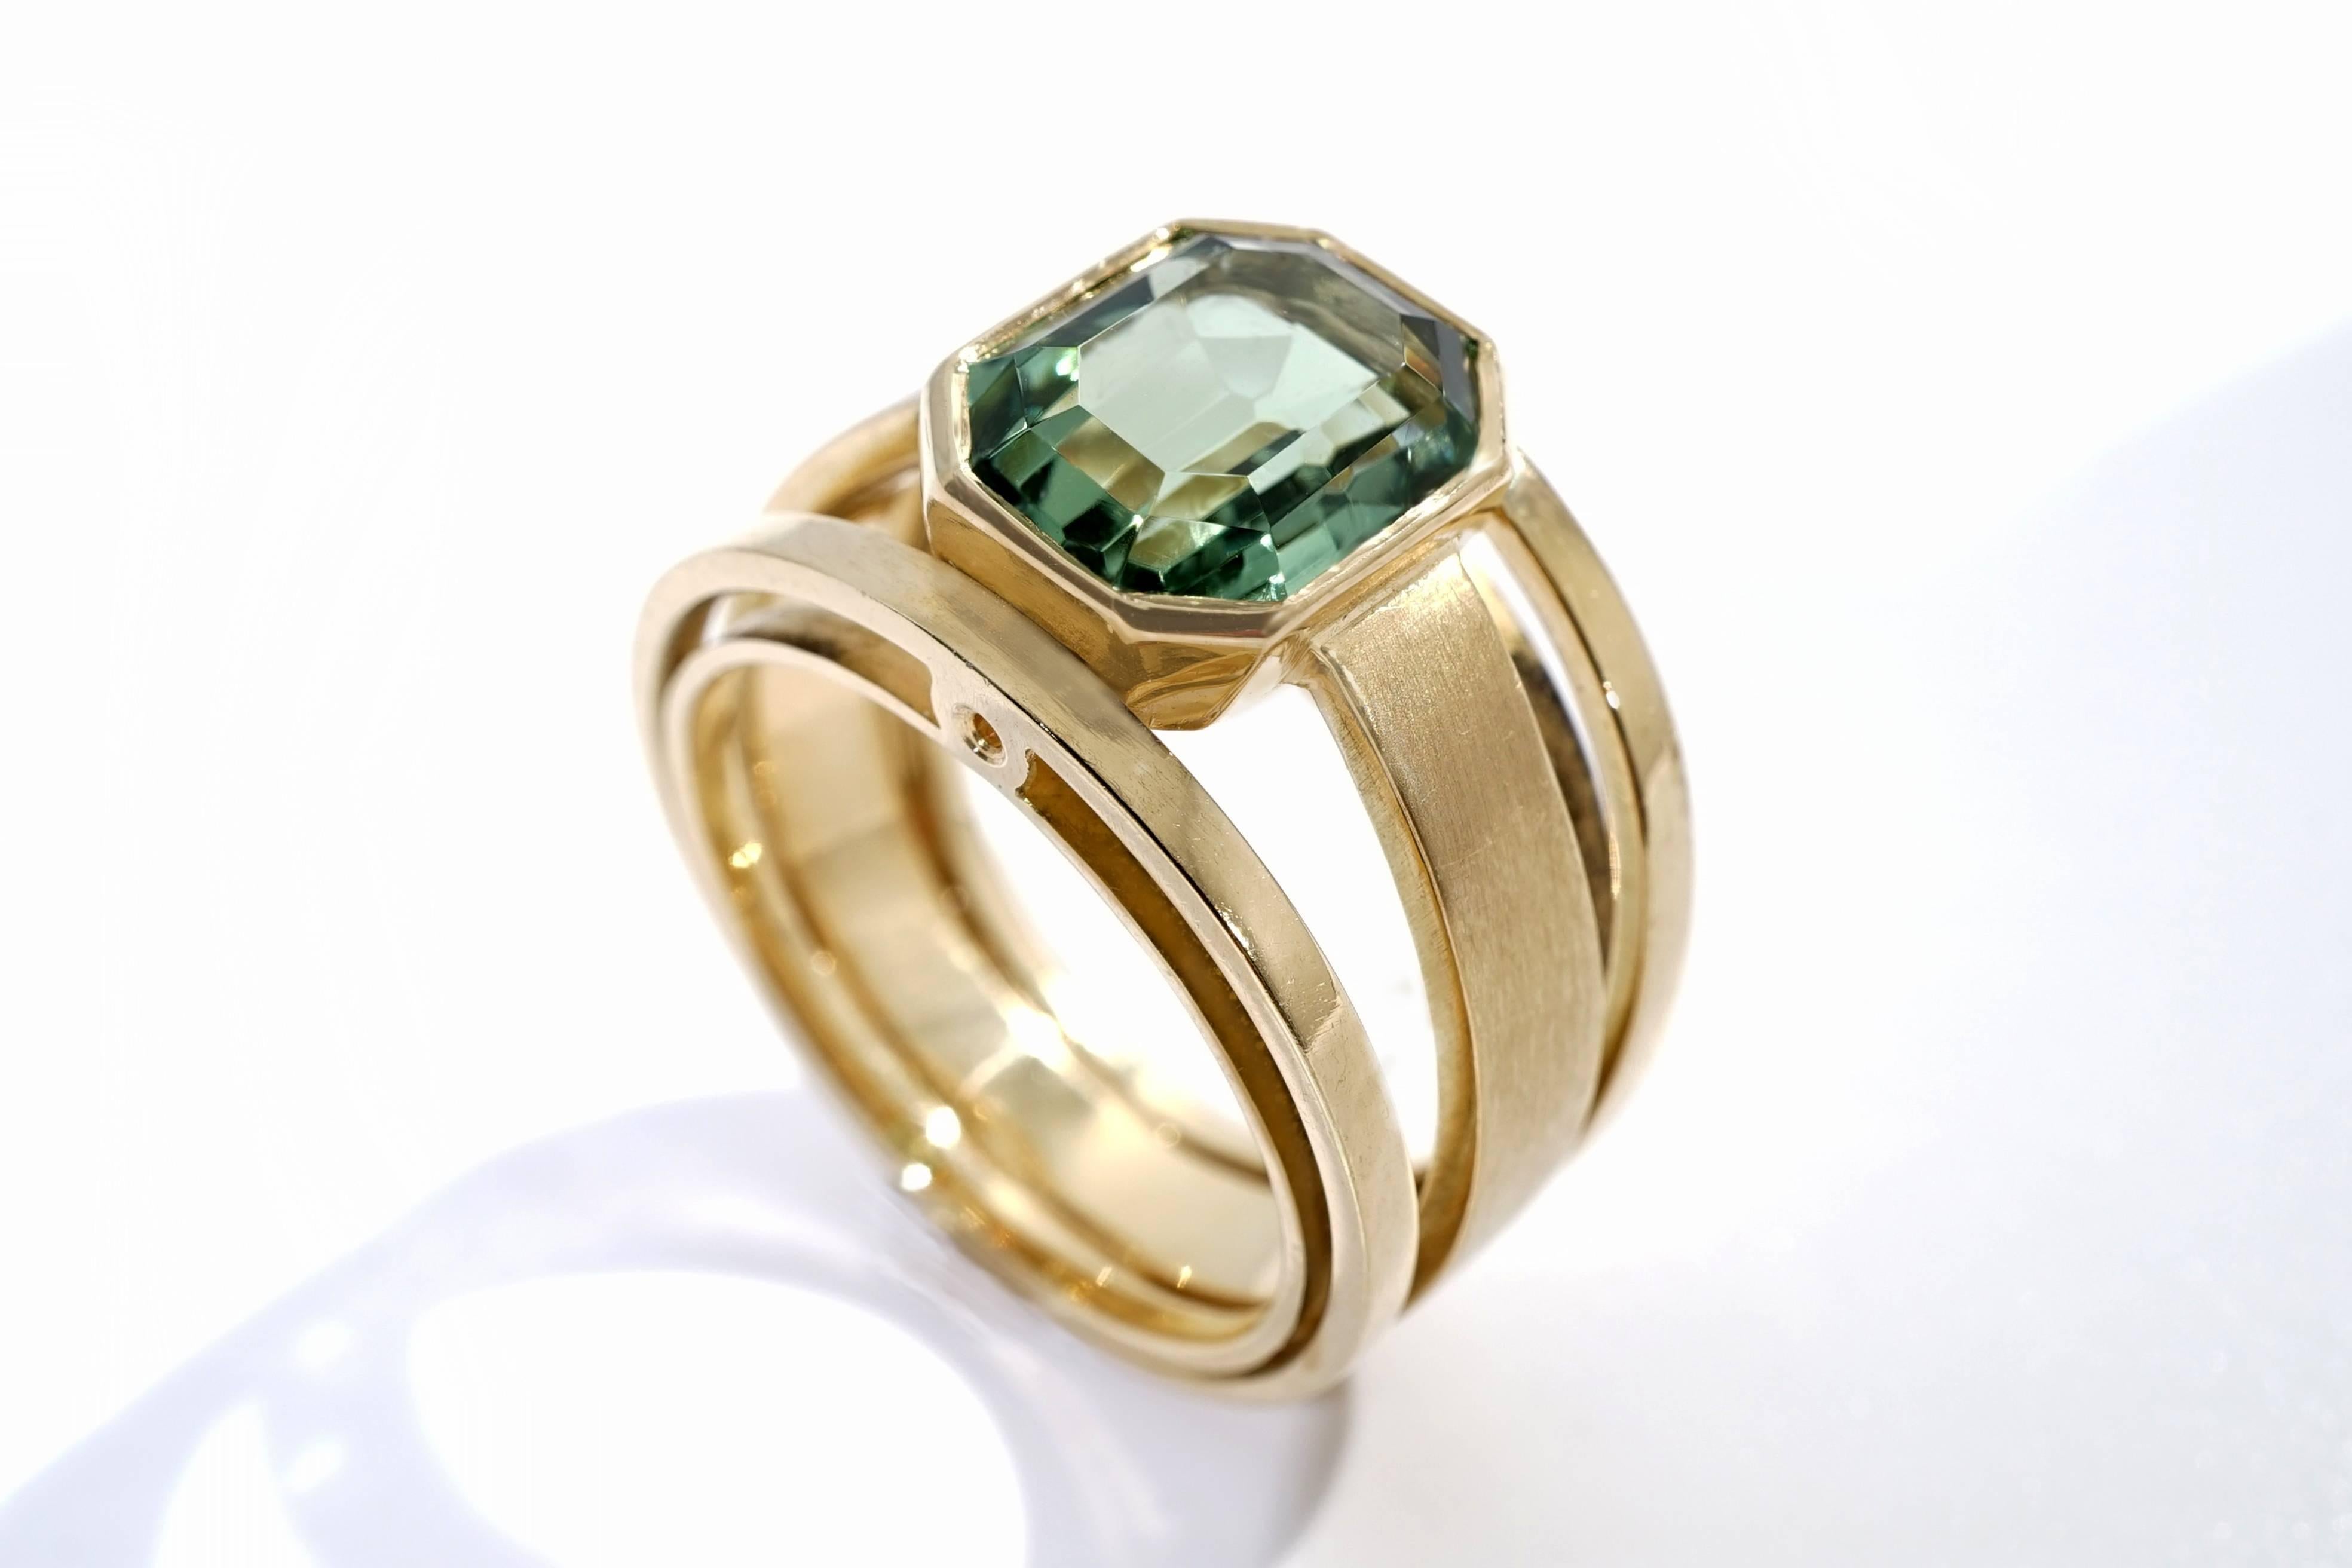 Coralie Van Caloen 18 Carat Yellow Gold Link Green Tourmaline Band Ring is entirely hand made and forged in Belgium by experts goldsmiths therefore it is a very unique piece. This brushed gold ring has an elegant and structural design. The green